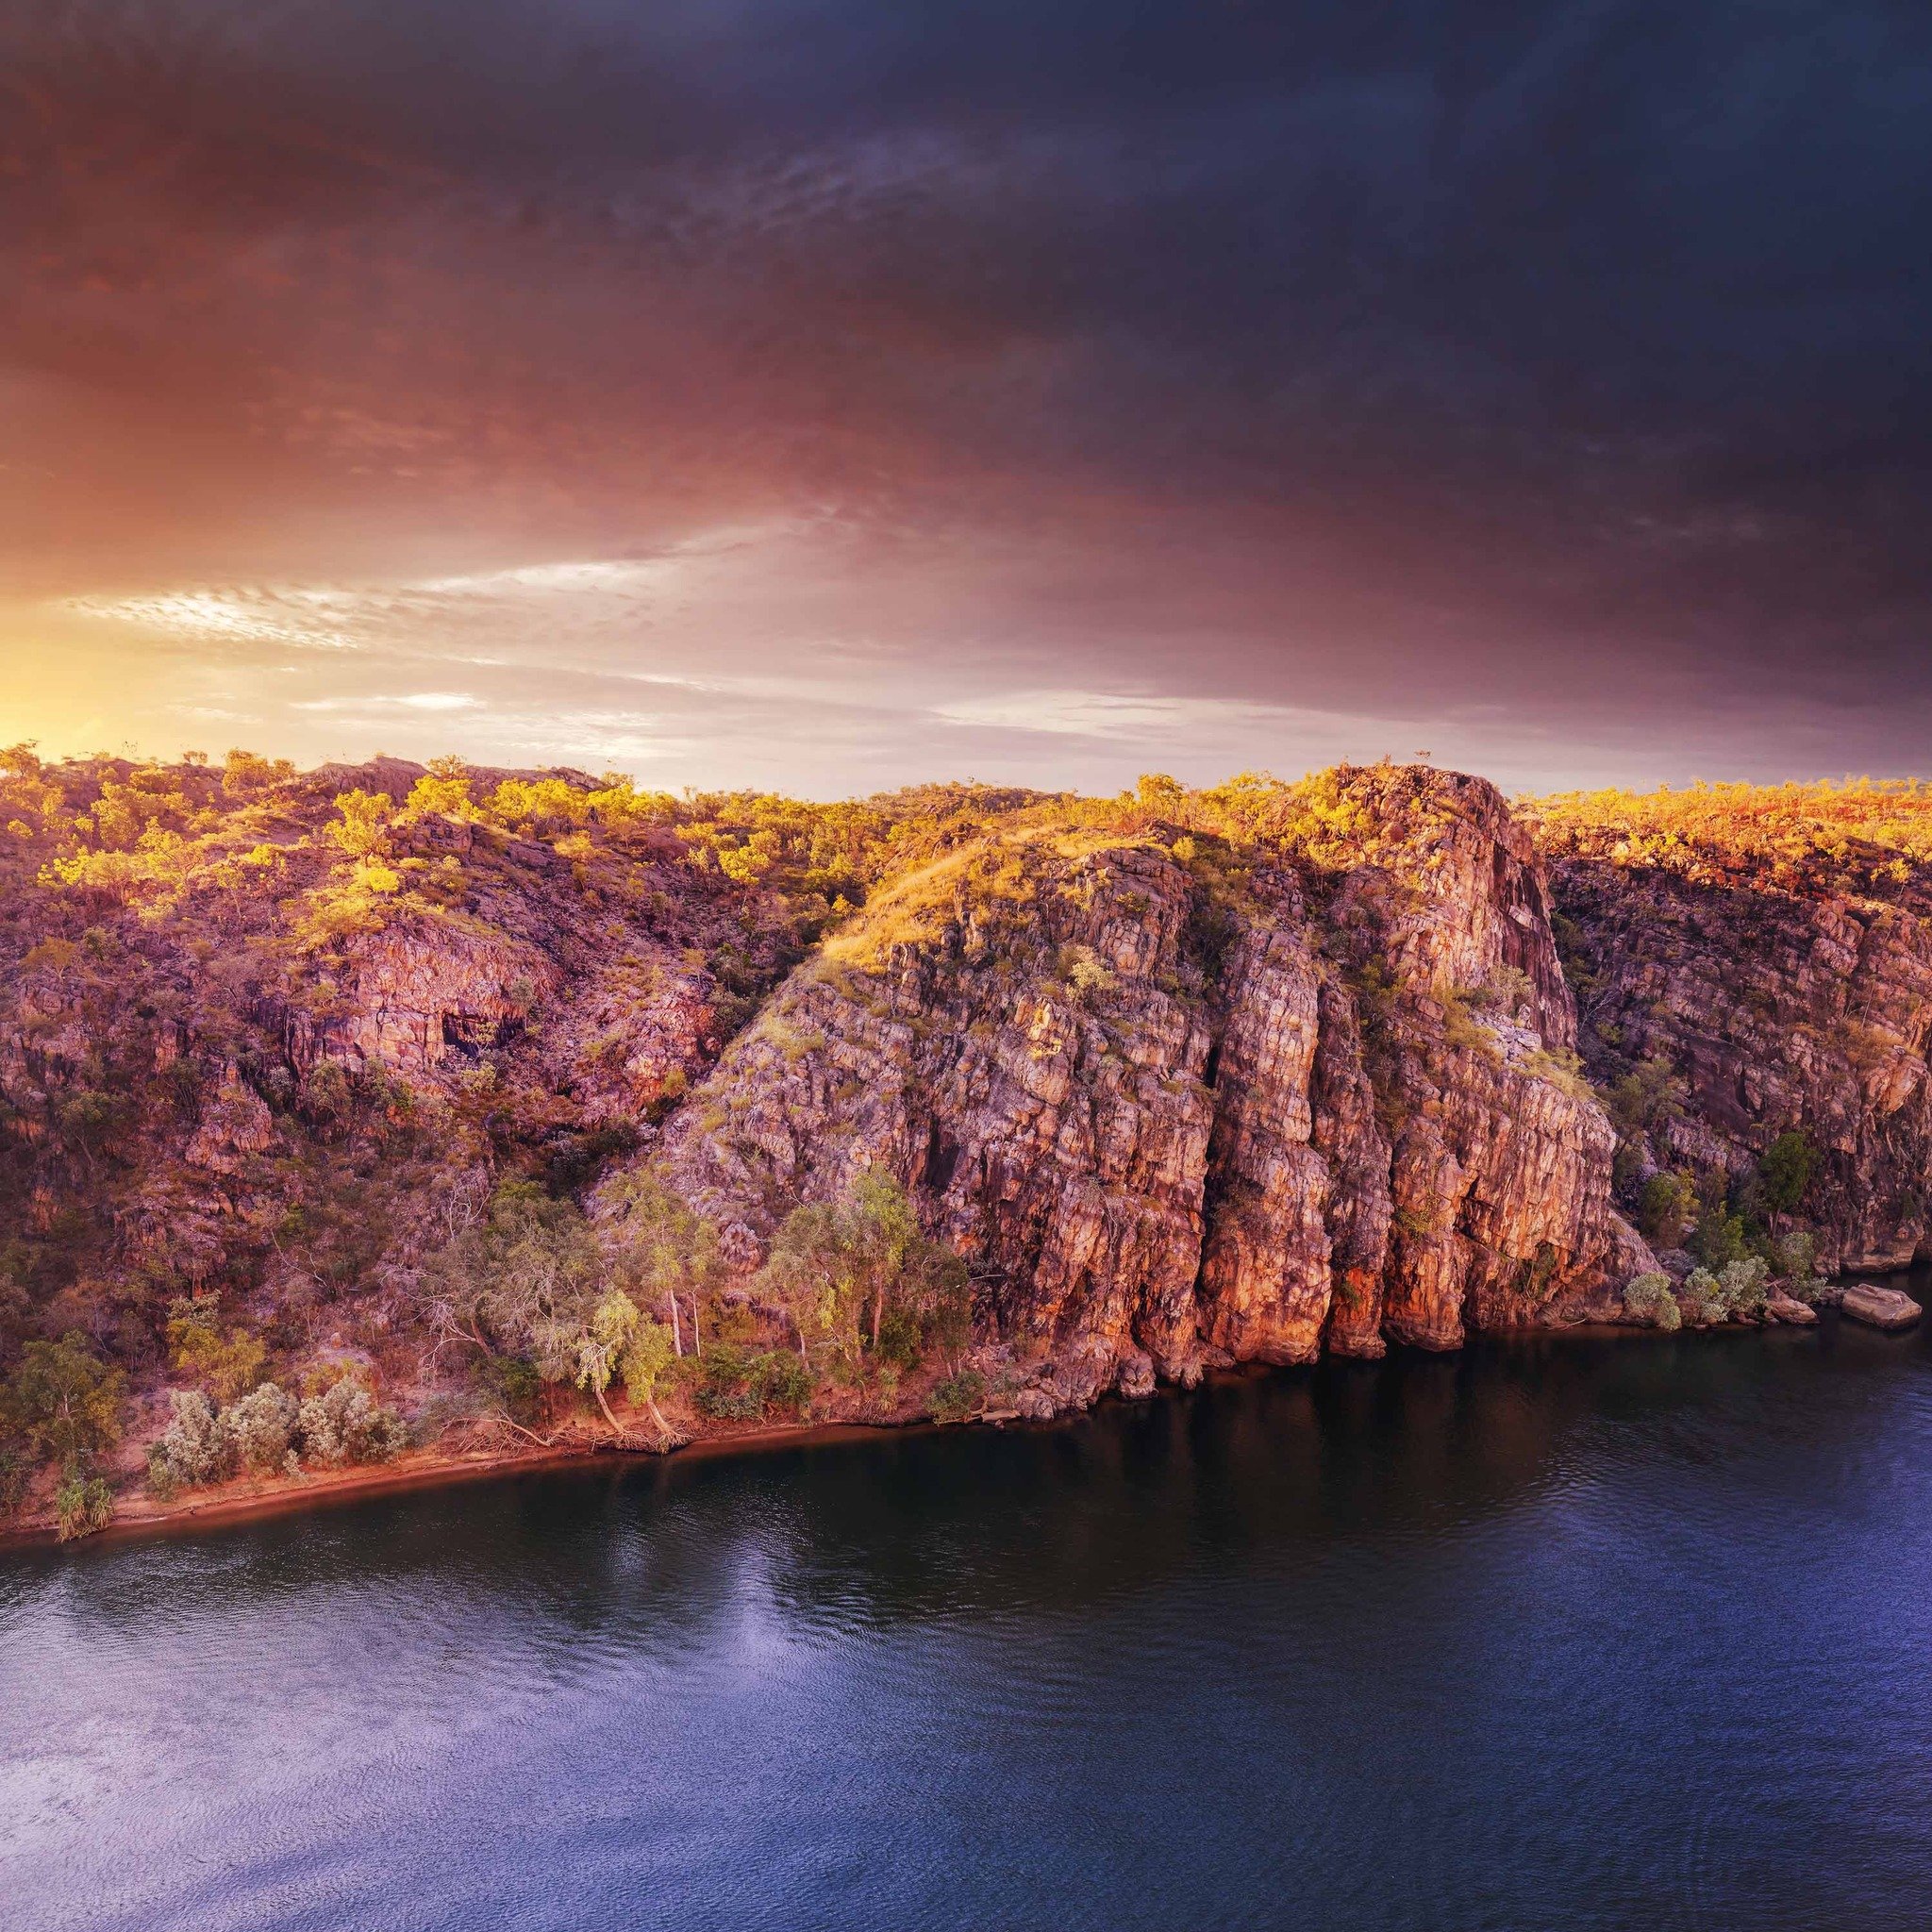 BARUWEI FIRE

The cliffs in this image mark the imposing entrance into the gorge system of Nitmiluk National Park. 

Shooting sunrise and sunset from the Baruwei Lookout above the first gorge is something I do almost every visit to Nitmiluk! Yet, it 